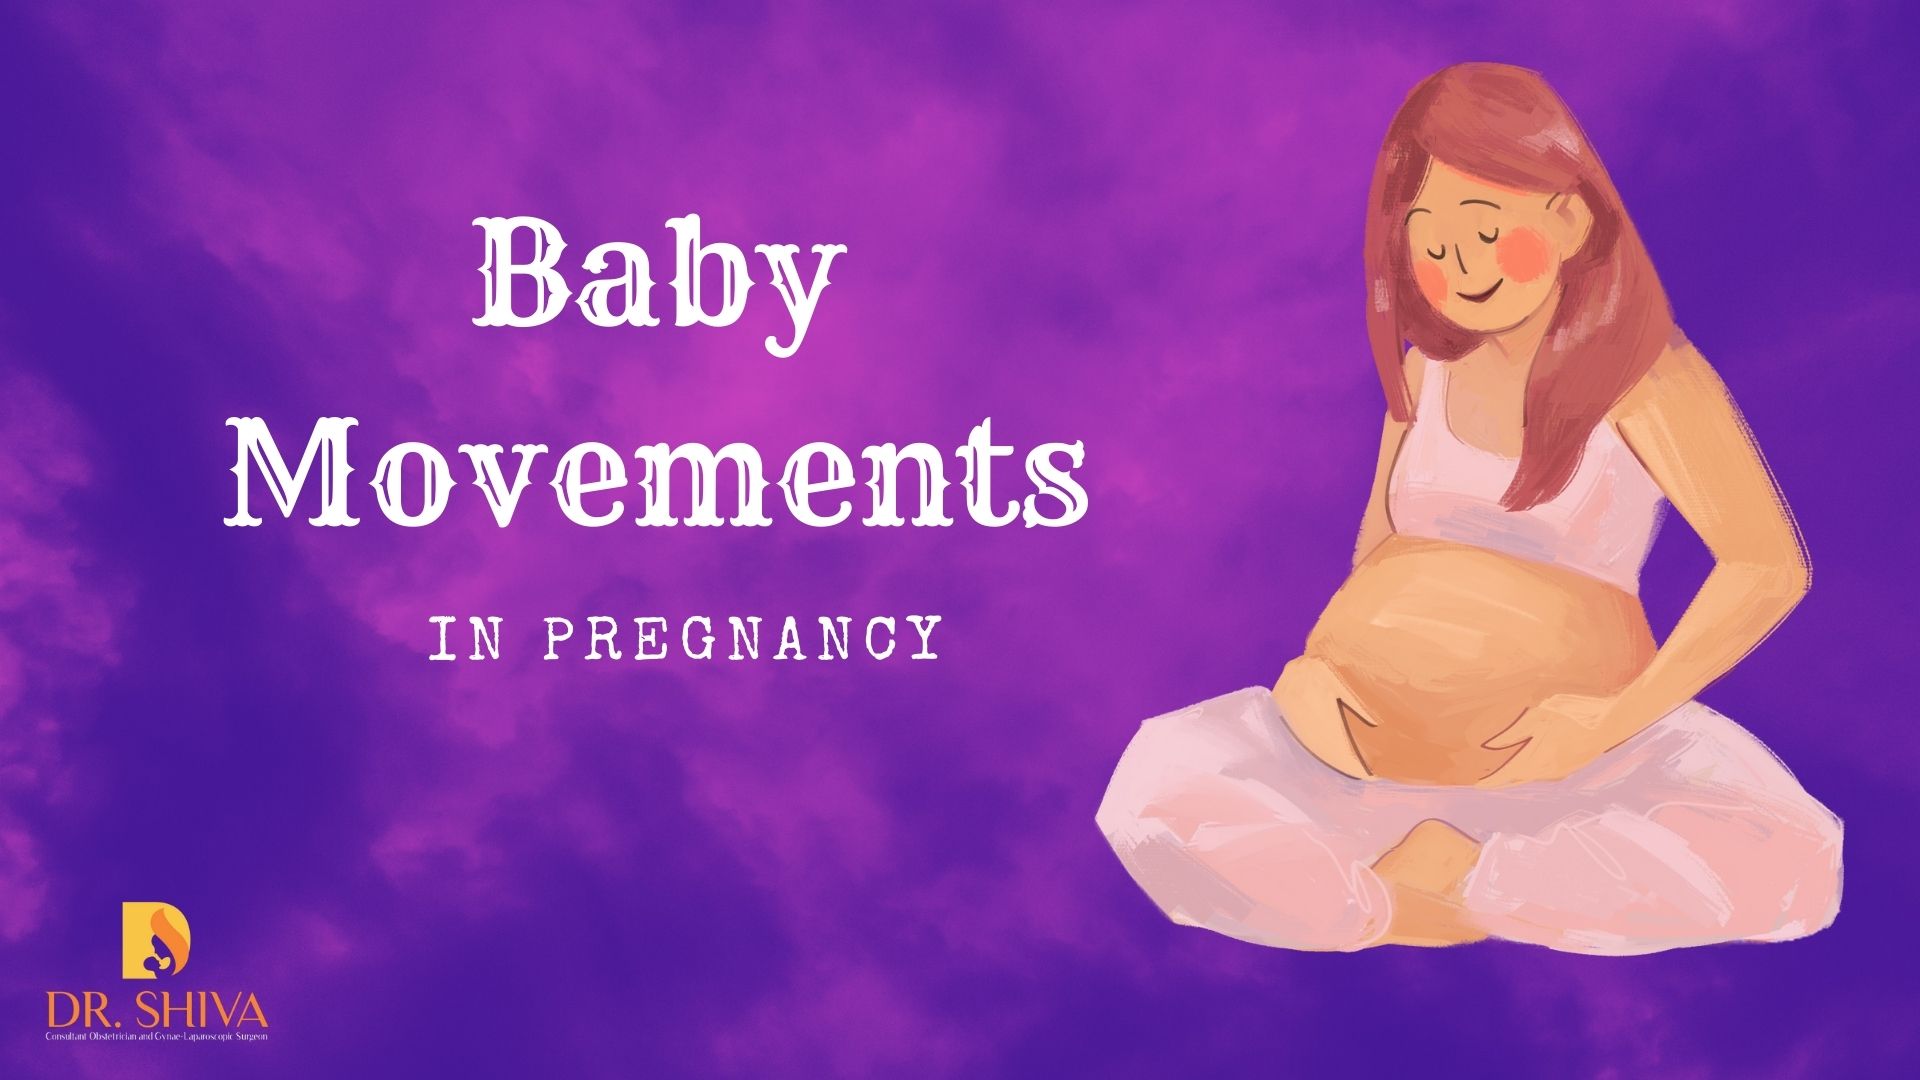 Baby movements in pregnancy